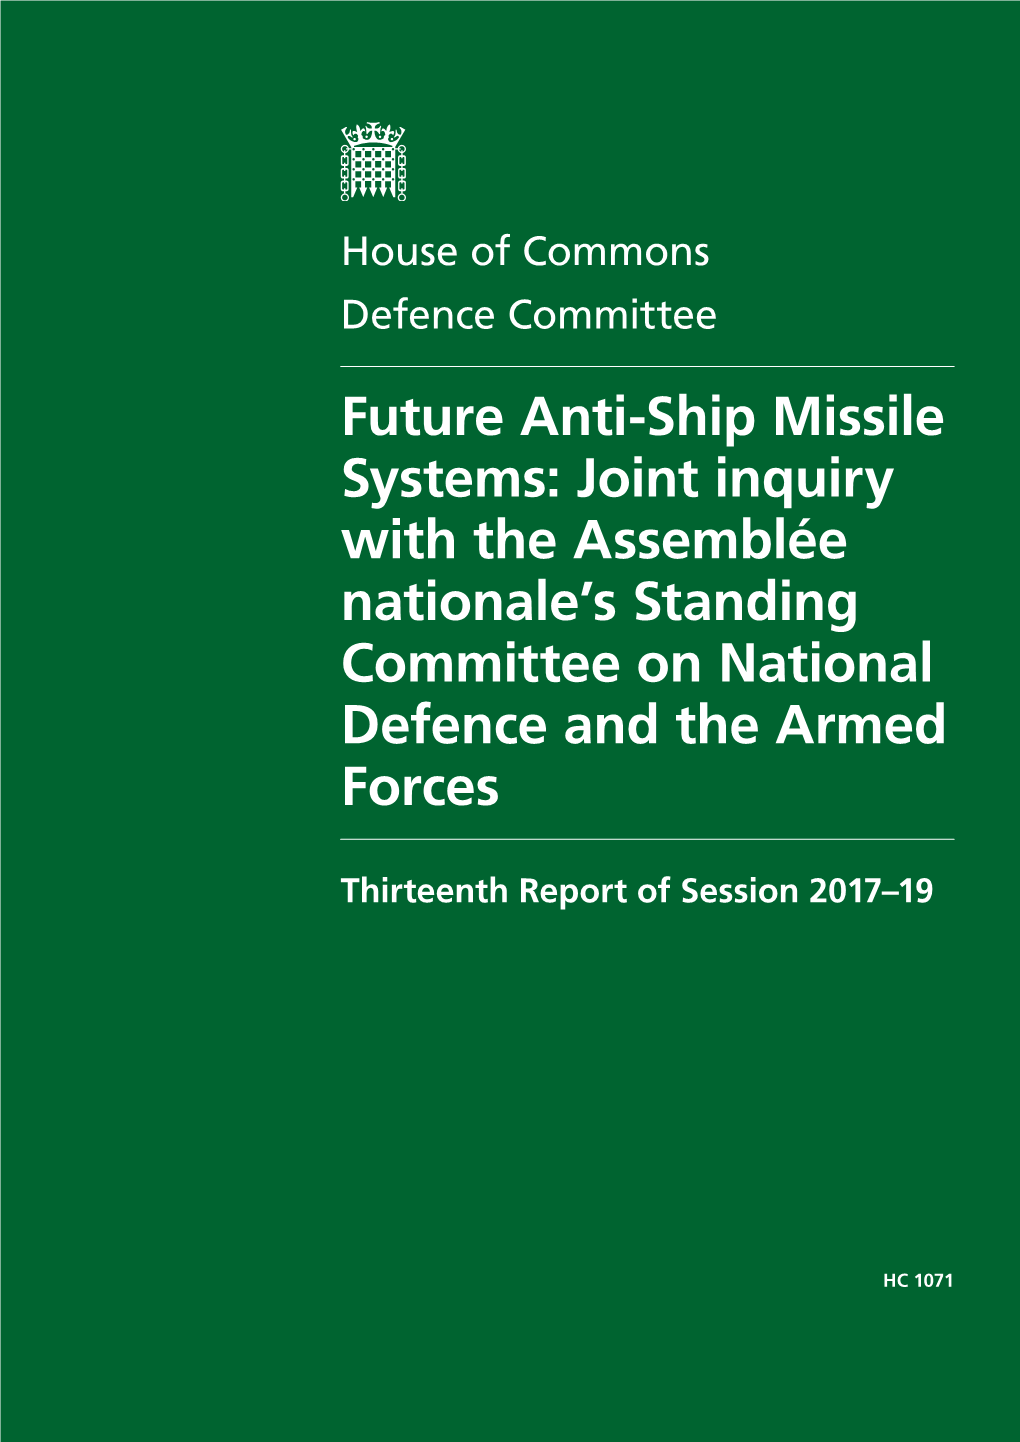 Future Anti-Ship Missile Systems: Joint Inquiry with the Assemblée Nationale’S Standing Committee on National Defence and the Armed Forces